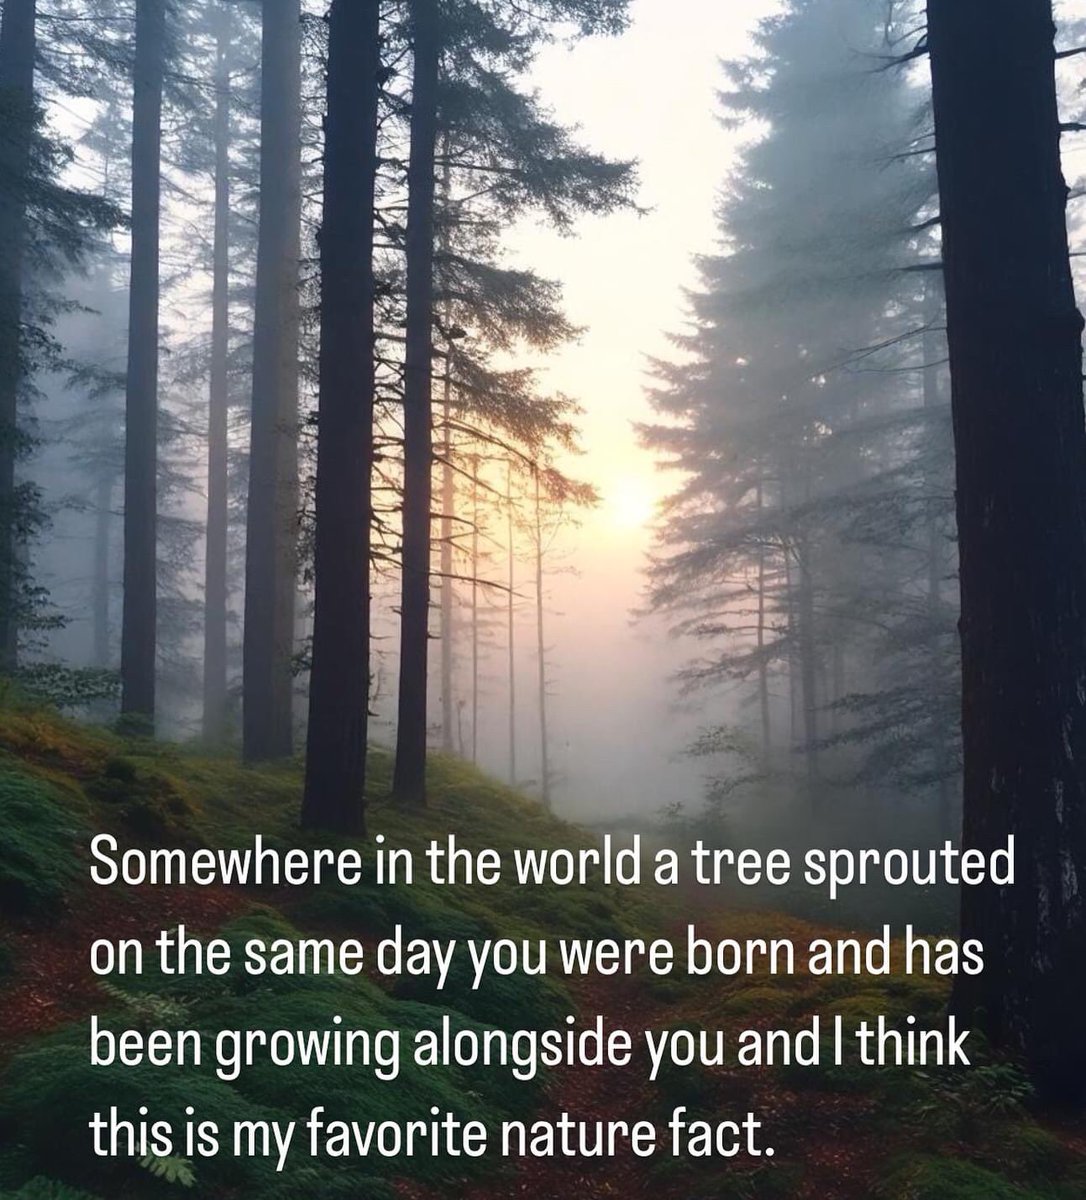 #nature #NatureConnection #NatureTherapy